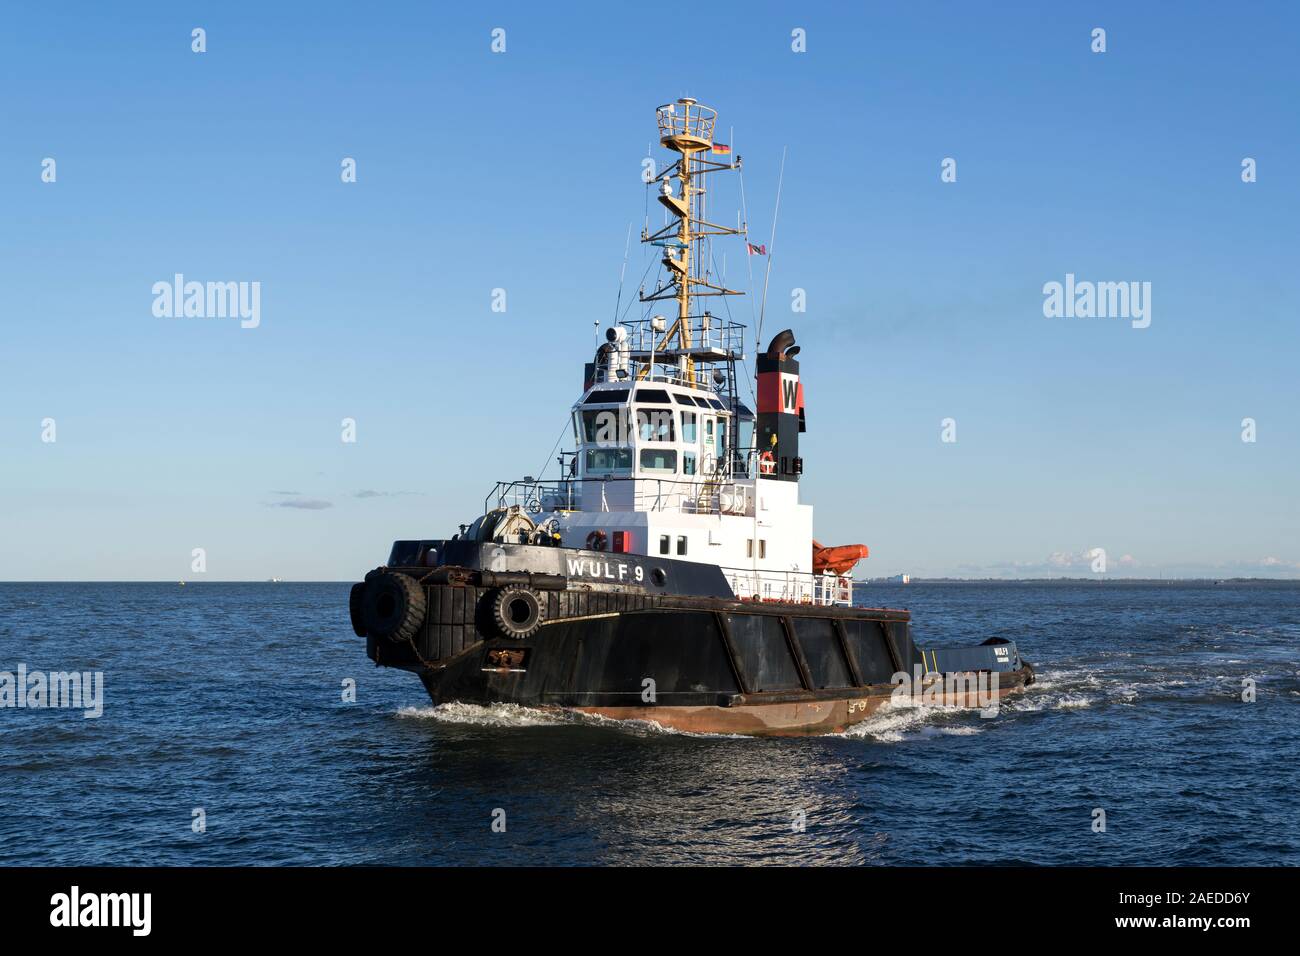 tugboat WULF 9 on the river Elbe Stock Photo